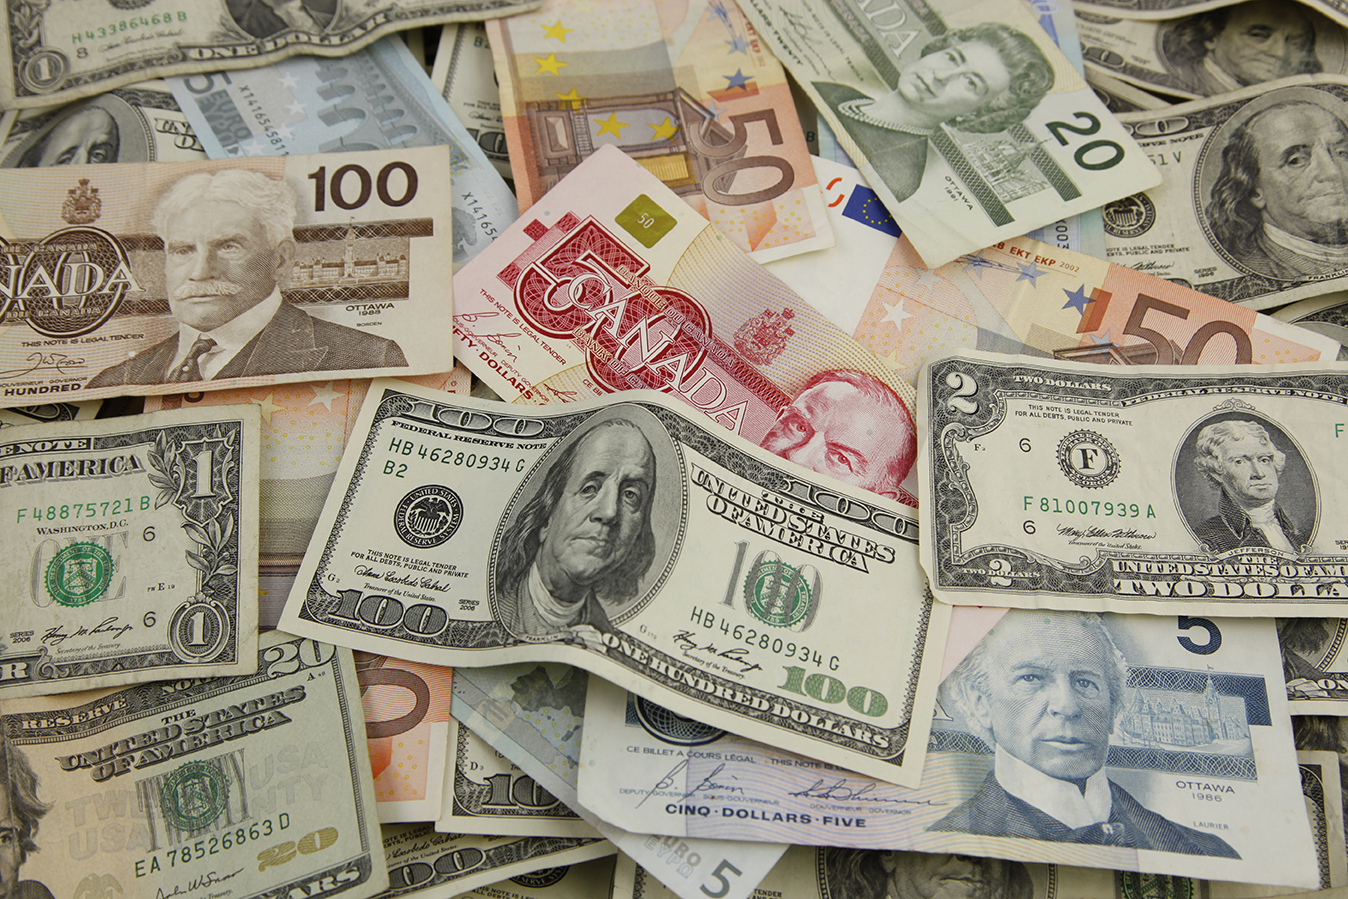 image of international currency, money from countries all over the globe